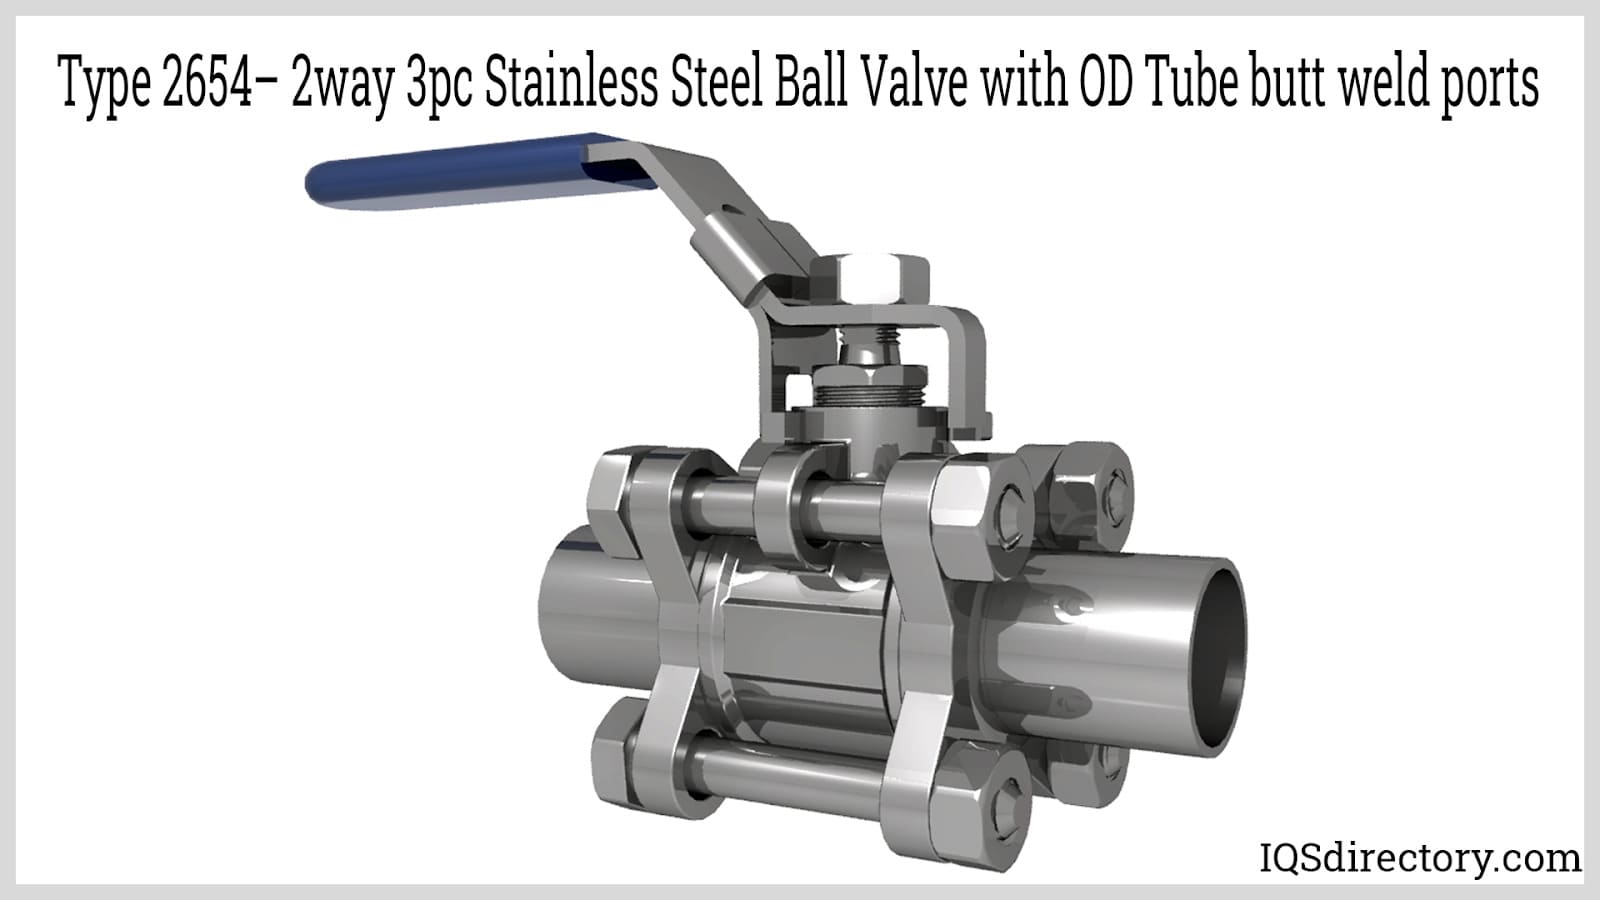 Type 2654 - 2way 3pc Stainless Steel Ball Vale with OD Tube butt weld ports